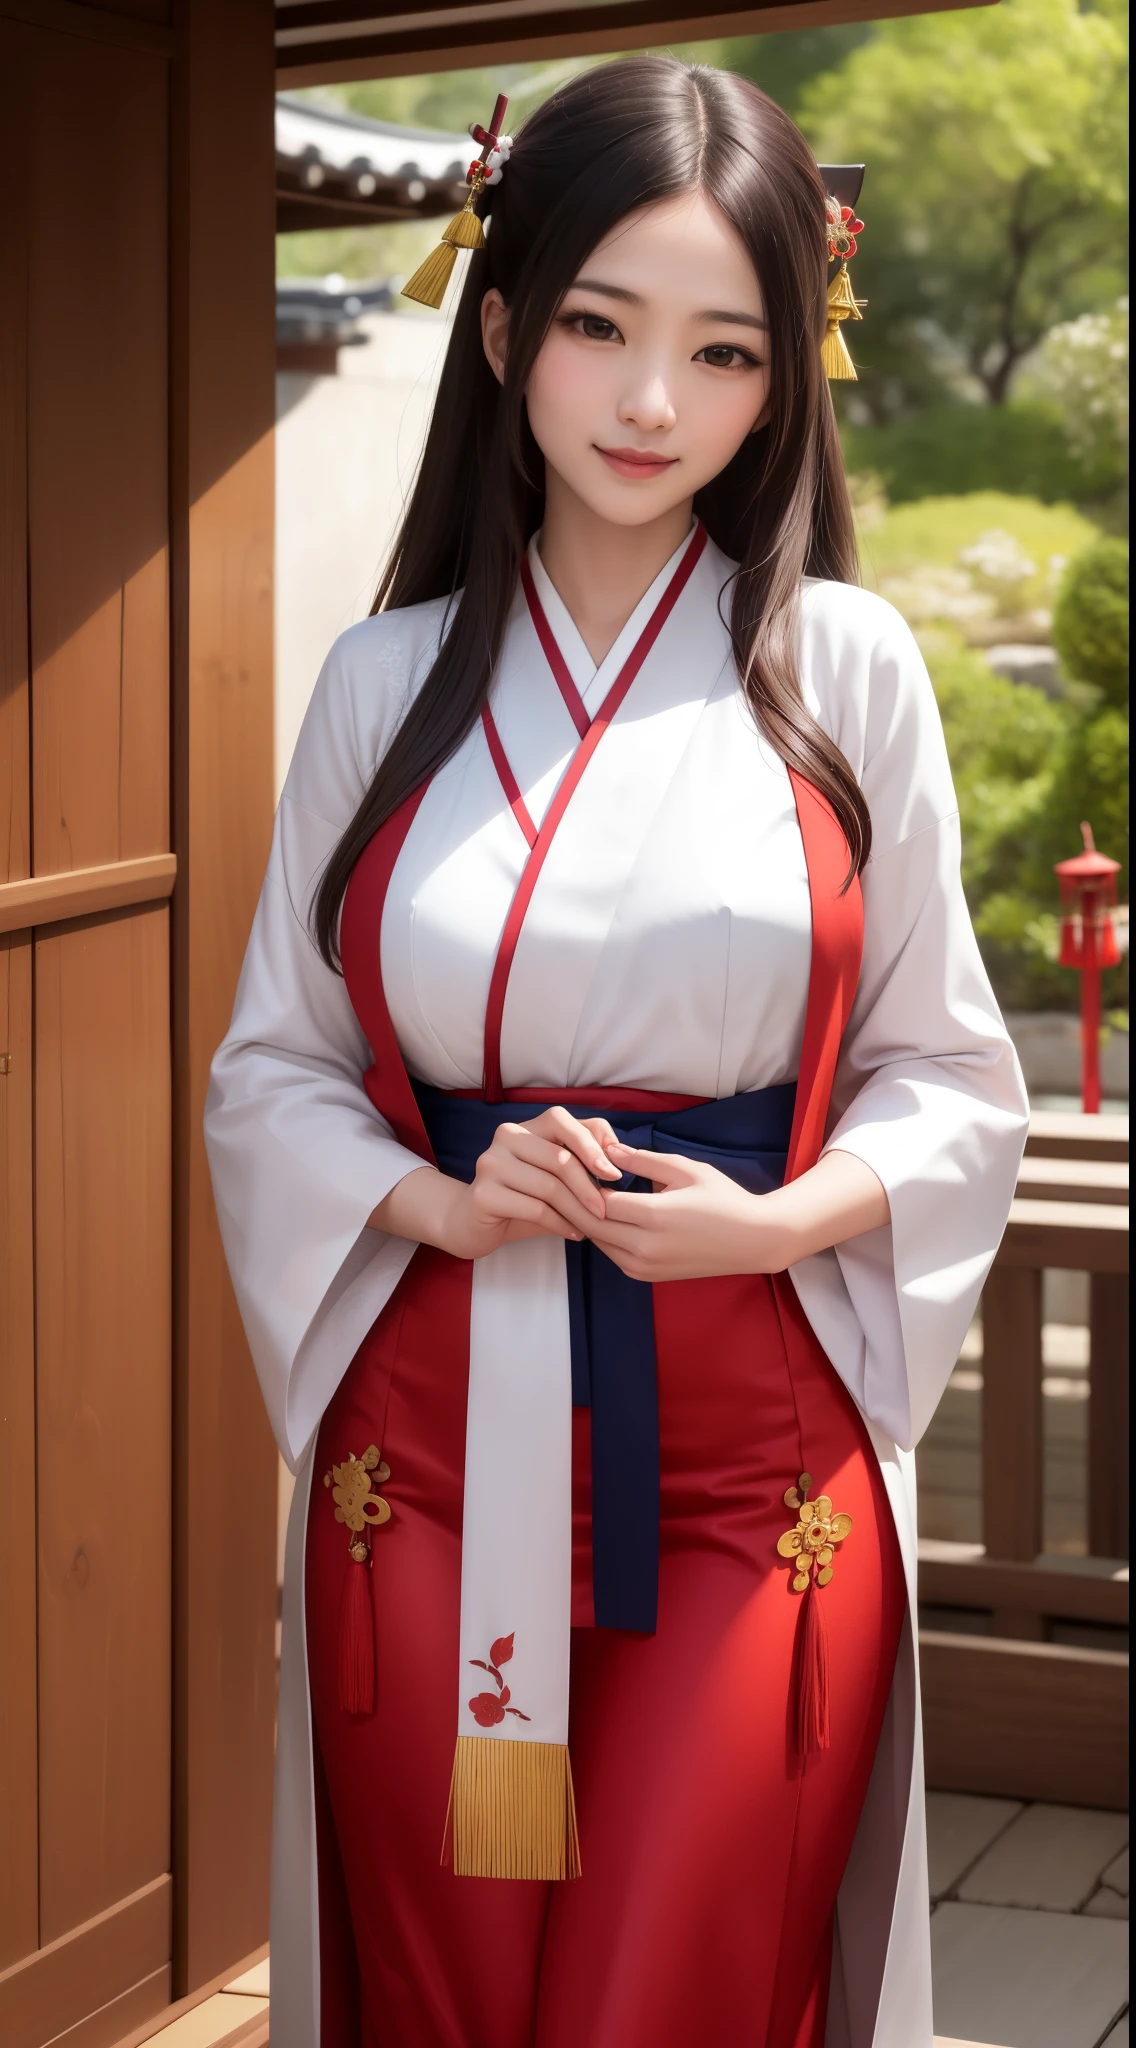 In the serene embrace of a Japanese Shinto shrine, behold a photo of a beautiful miko. Dressed in traditional robes adorned with sacred symbols, she carries an air of reverence and grace. With a gentle smile, she performs sacred rituals, embodying the spirit of the shrine's ancient traditions. (Serene, Sacred, Graceful), (Traditional miko attire:1.3), (Intricate details:1.2), (Photorealistic:1.2), (Reverent, Tranquil, Spiritually-connected), inspired by the timeless art of Utagawa Hiroshige and the spiritual essence of Shinto practices, smile, big breasts,